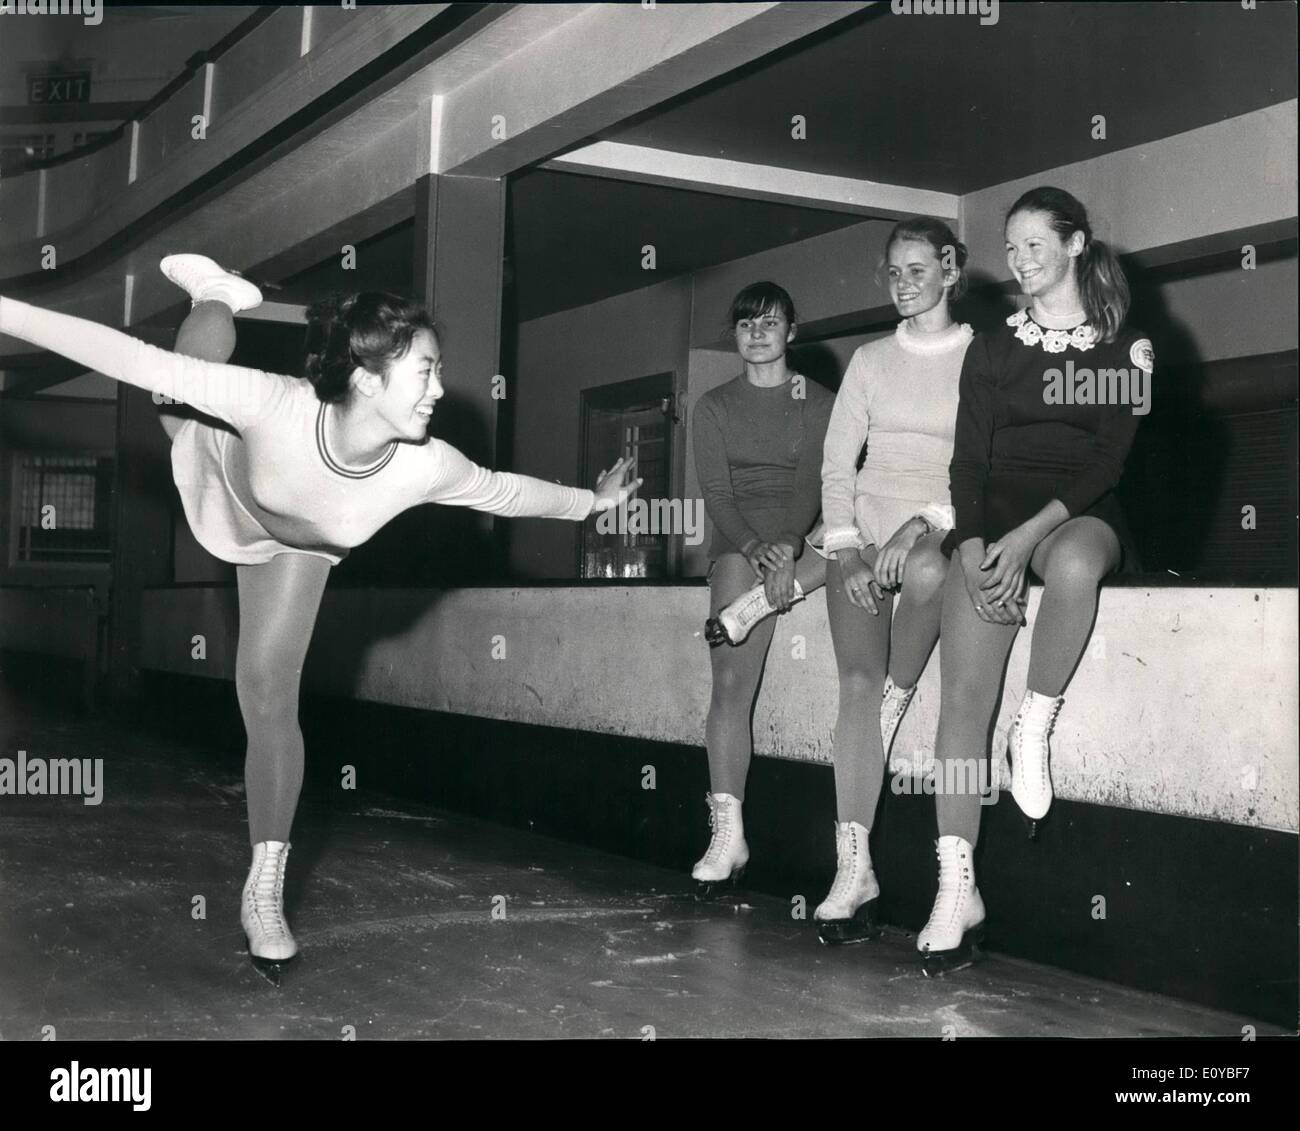 Oct. 10, 1969 - JAPANESE SKATER TO TAKE PART IN THE PRESTIGE RICHMOND INTERNATIONAL TROPHY: The first -ever Japanese ice skater, Miss Kazumi Yamashita, of Tokyo, is among the 24 competitors from eleven different countries taking part in the Prestige Richmond International Trophy which takes place at the Richmond ice risk on November 3rd. Photo shows 17 year old Miss Kazumi Yamashita from Tokyo sails past L-R Marlis Eicher of Switzerland, Lia Boes of Holland and British Champion Pat Dodds, at the start of practice this morning. Stock Photo